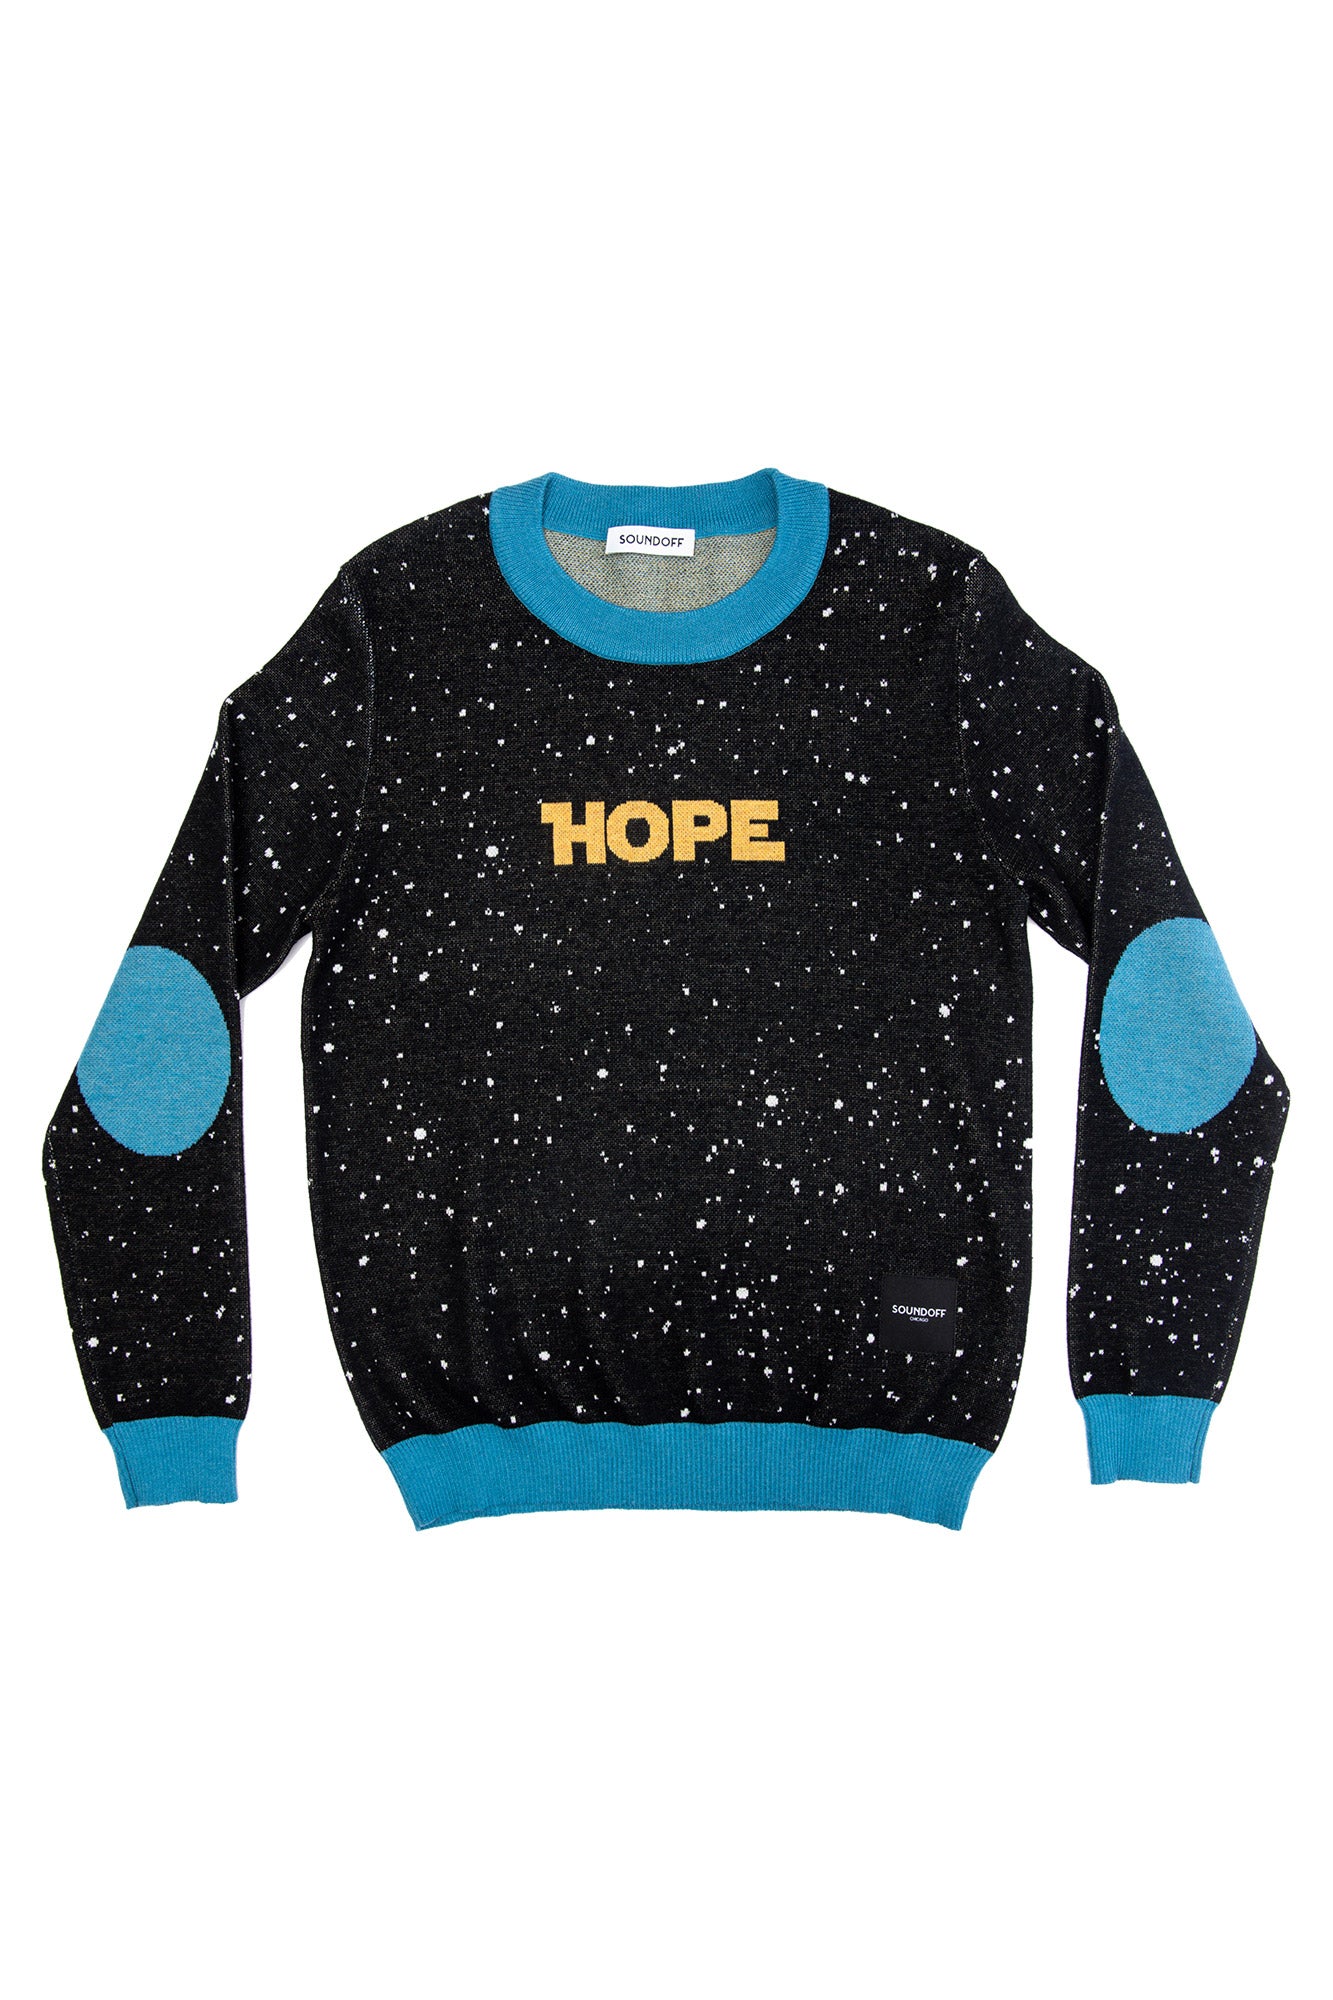 'STARRY HOPE' KNIT; MADE TO ORDER